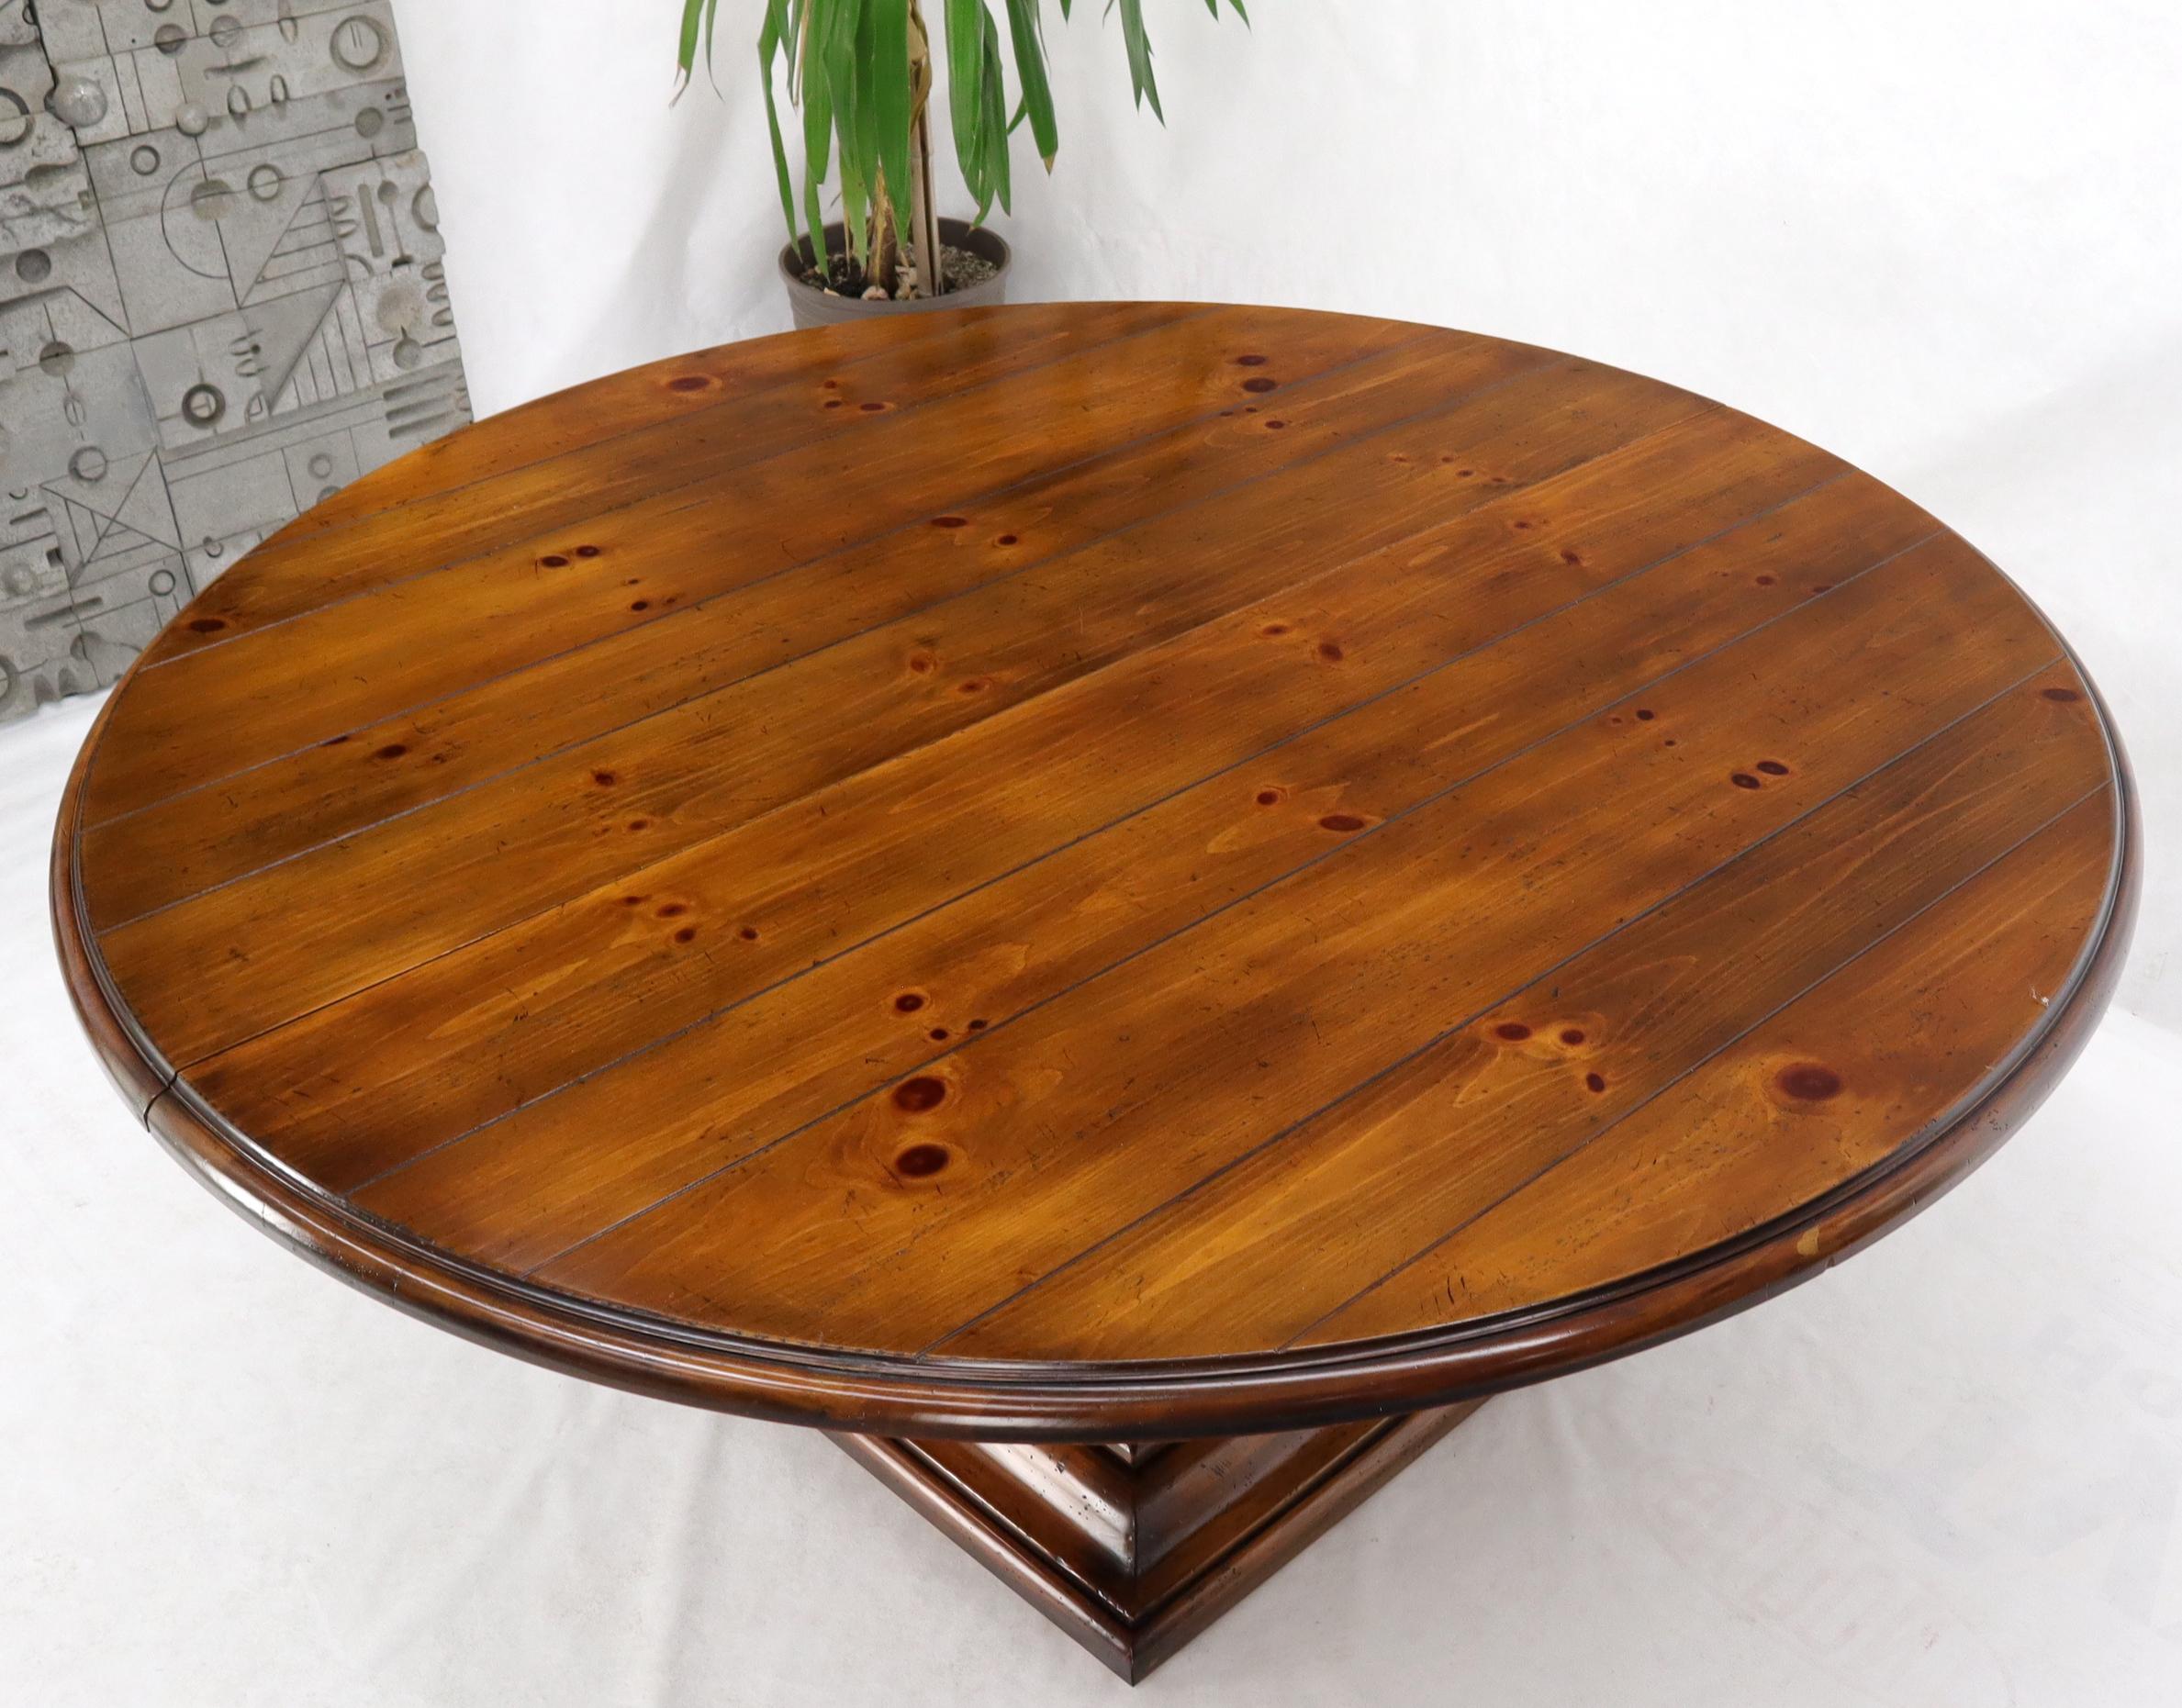 Unknown Large Round Colonial Spanish Square Base Pine Dining Table by Ralph Lauren